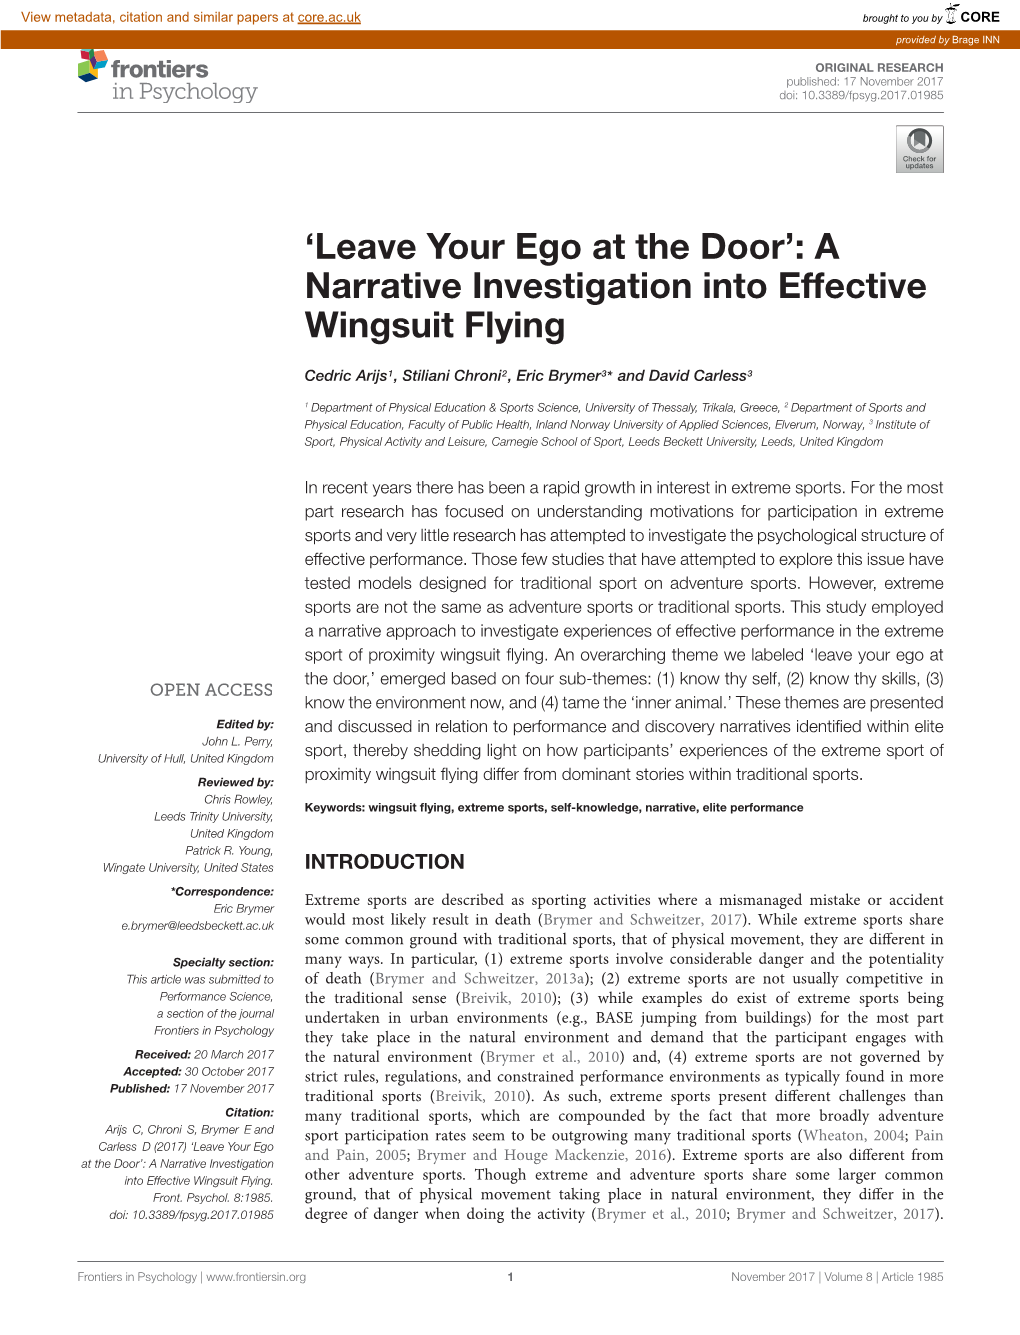 'Leave Your Ego at the Door': a Narrative Investigation Into Effective Wingsuit Flying